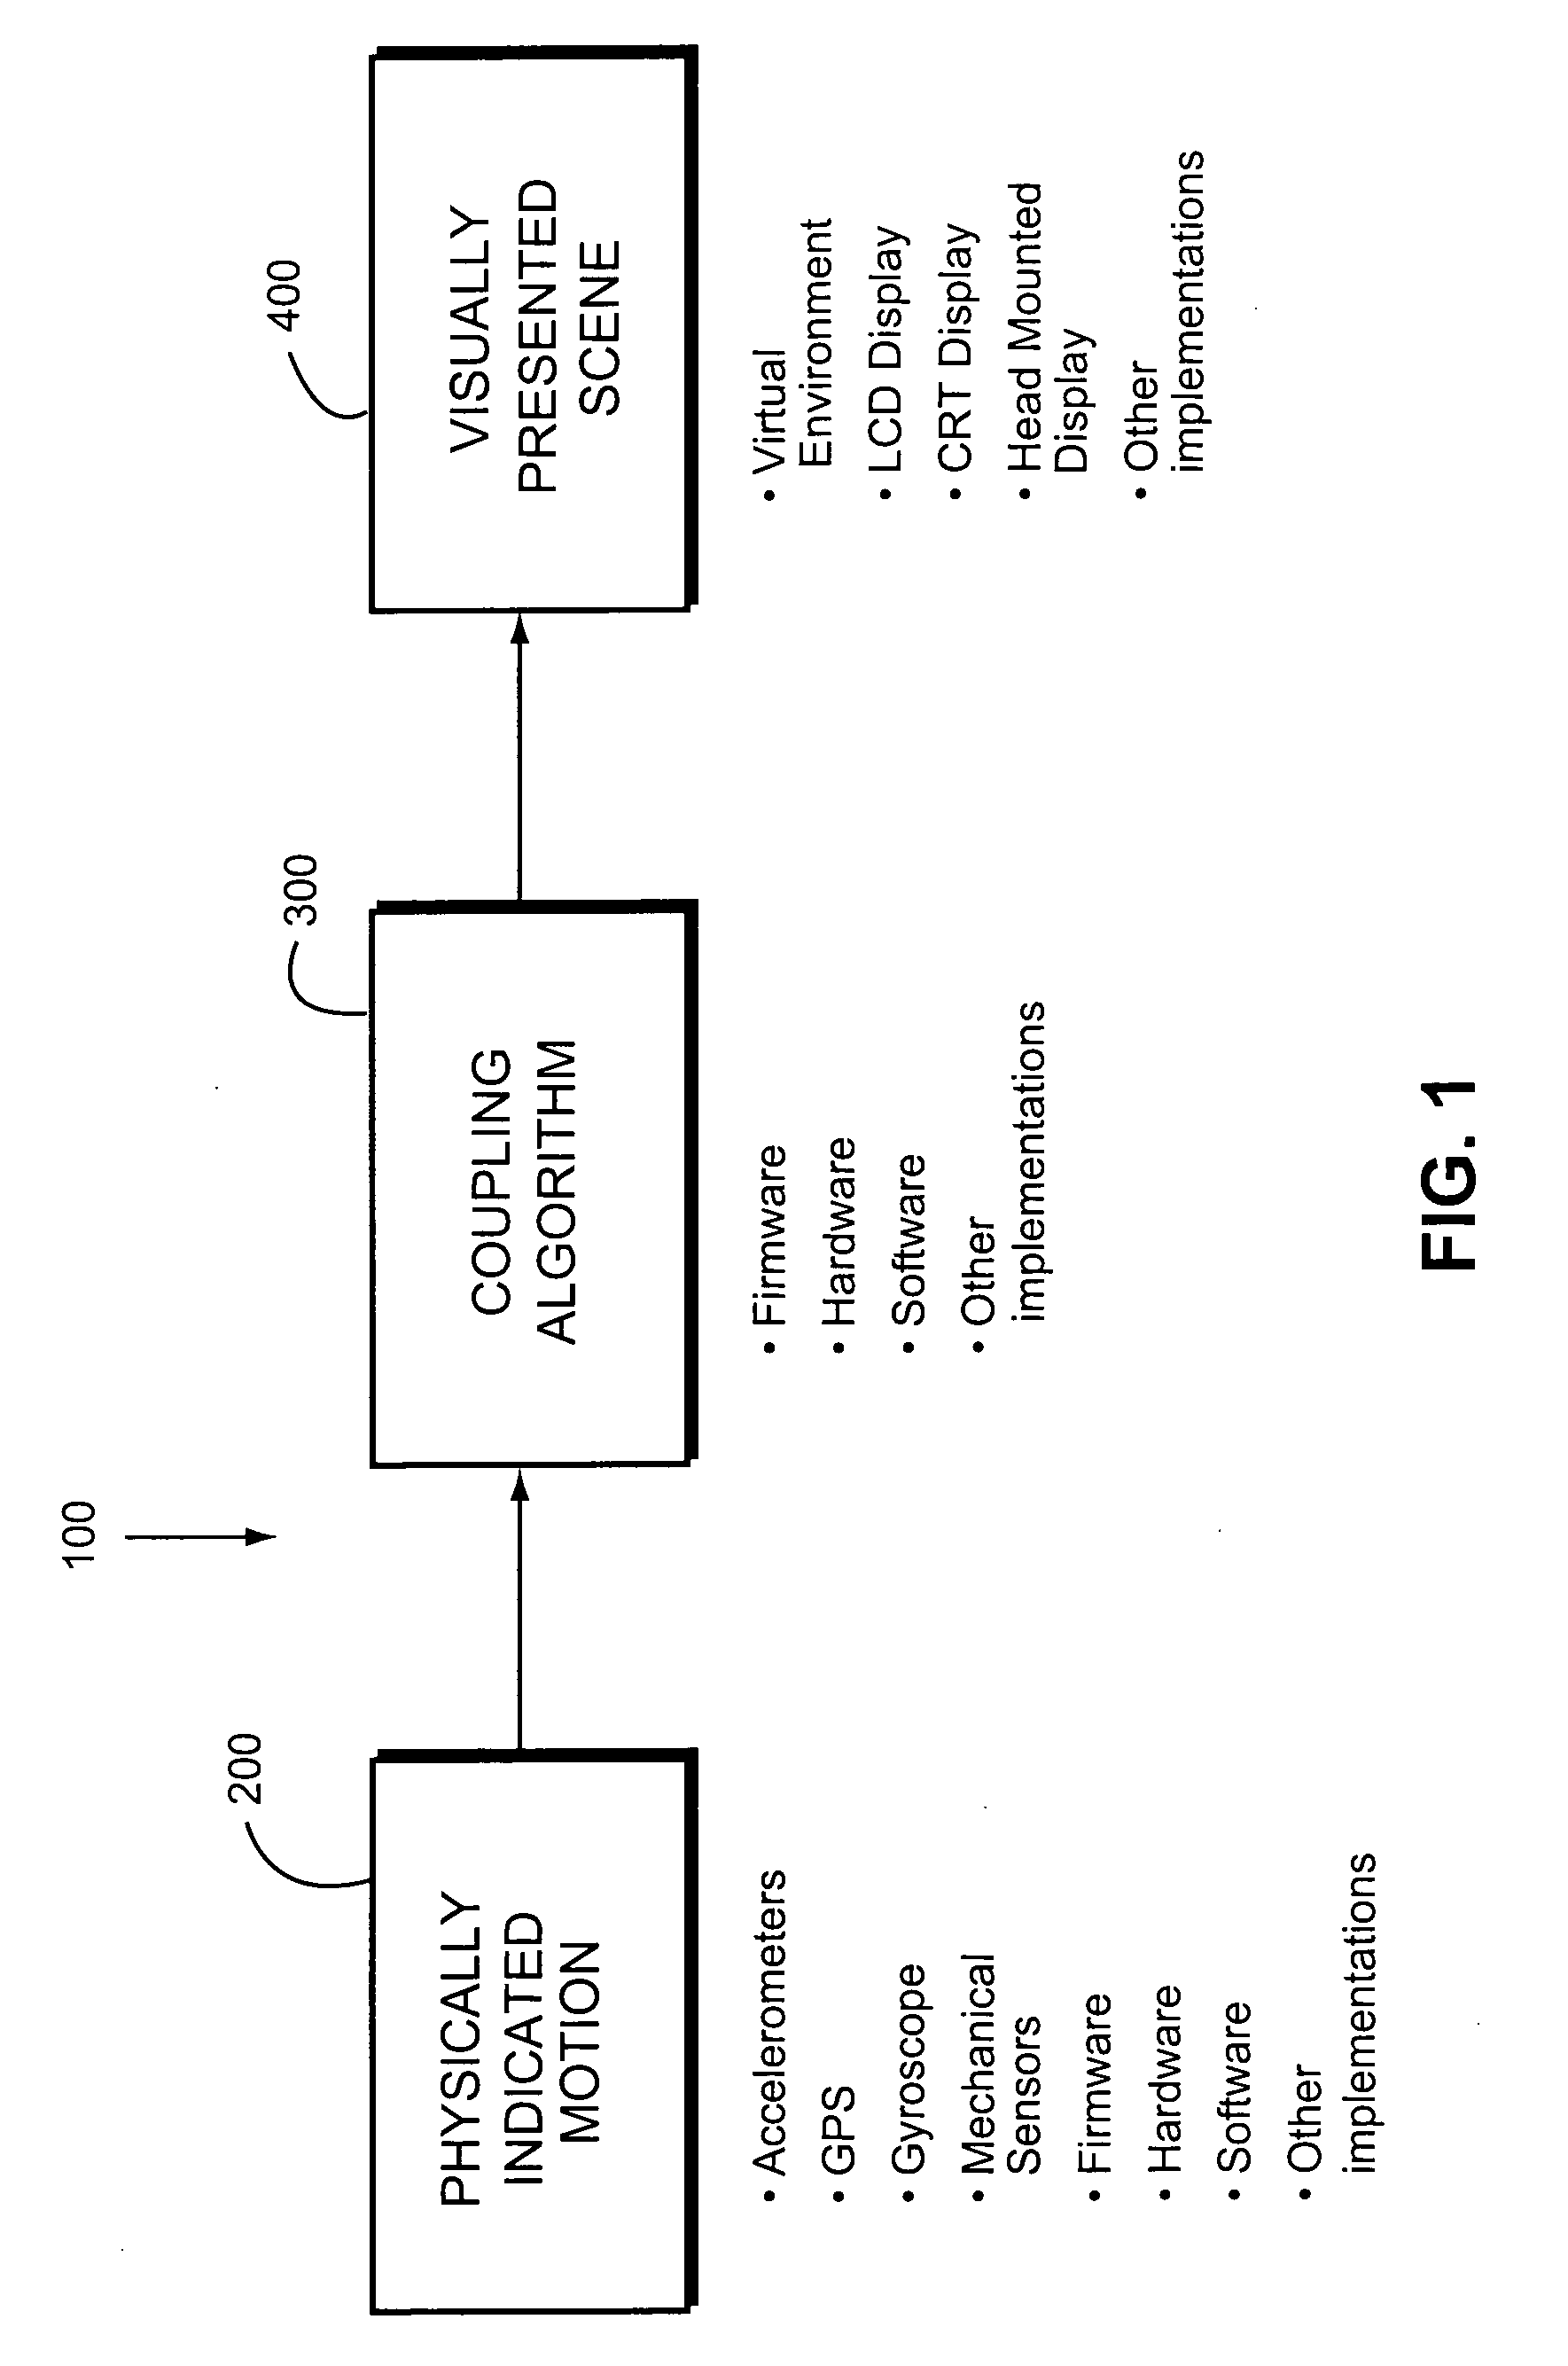 Motion-Coupled Visual Environment for Prevention or Reduction of Motion Sickness and Simulator/Virtual Environment Sickness